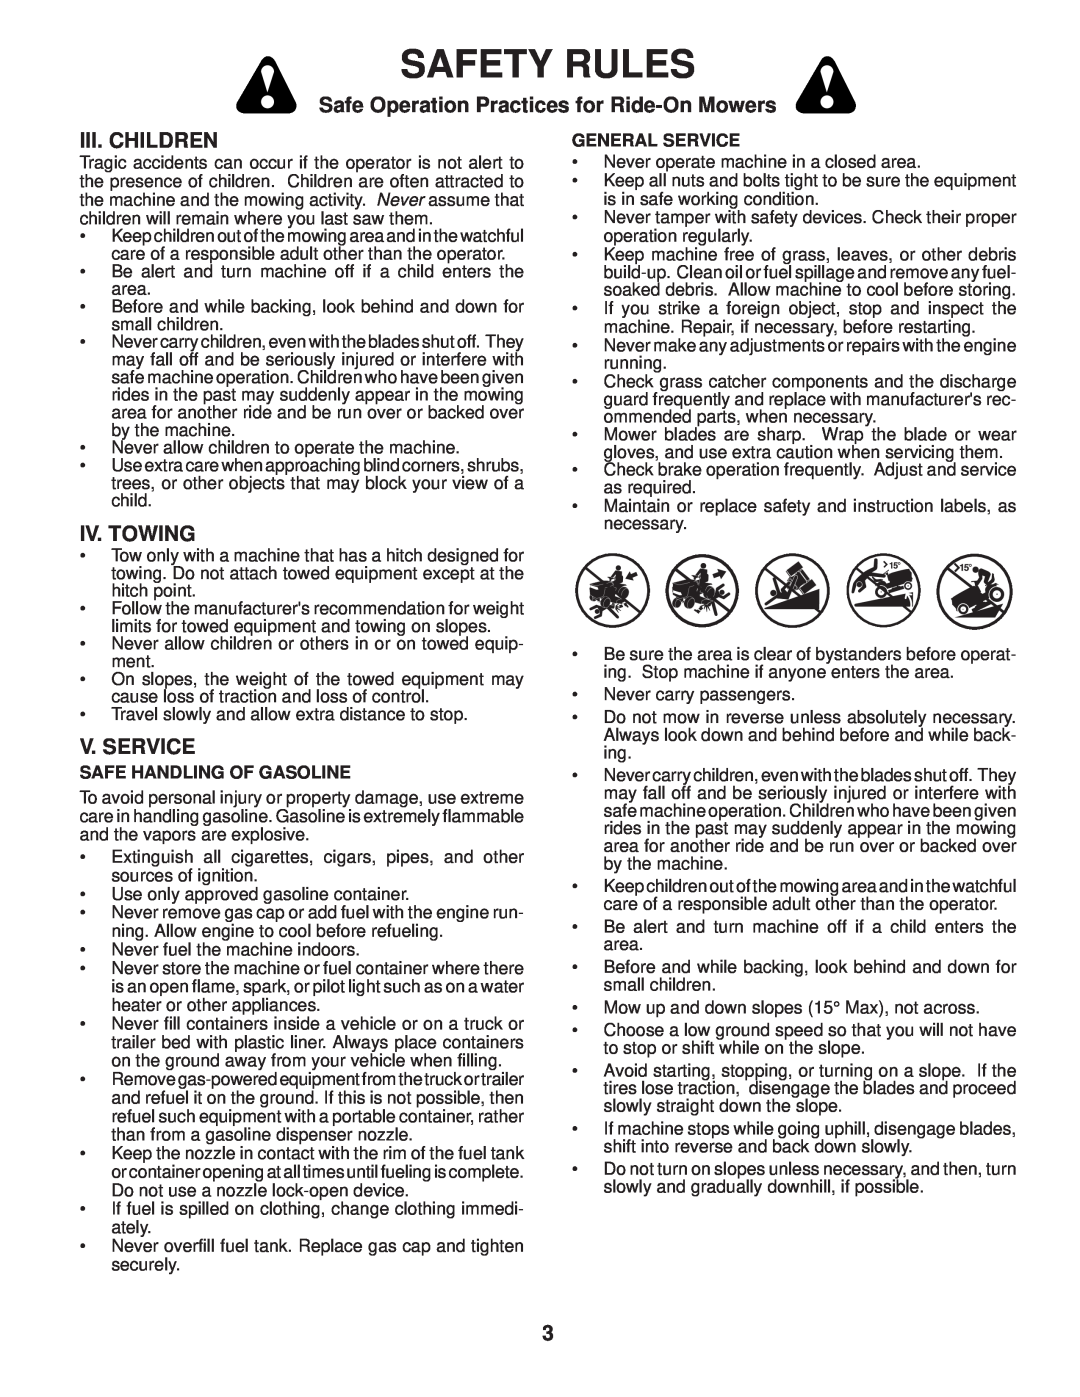 Poulan PB22TH42YT manual Iii. Children, Iv. Towing, V. Service, Safety Rules, Safe Operation Practices for Ride-On Mowers 